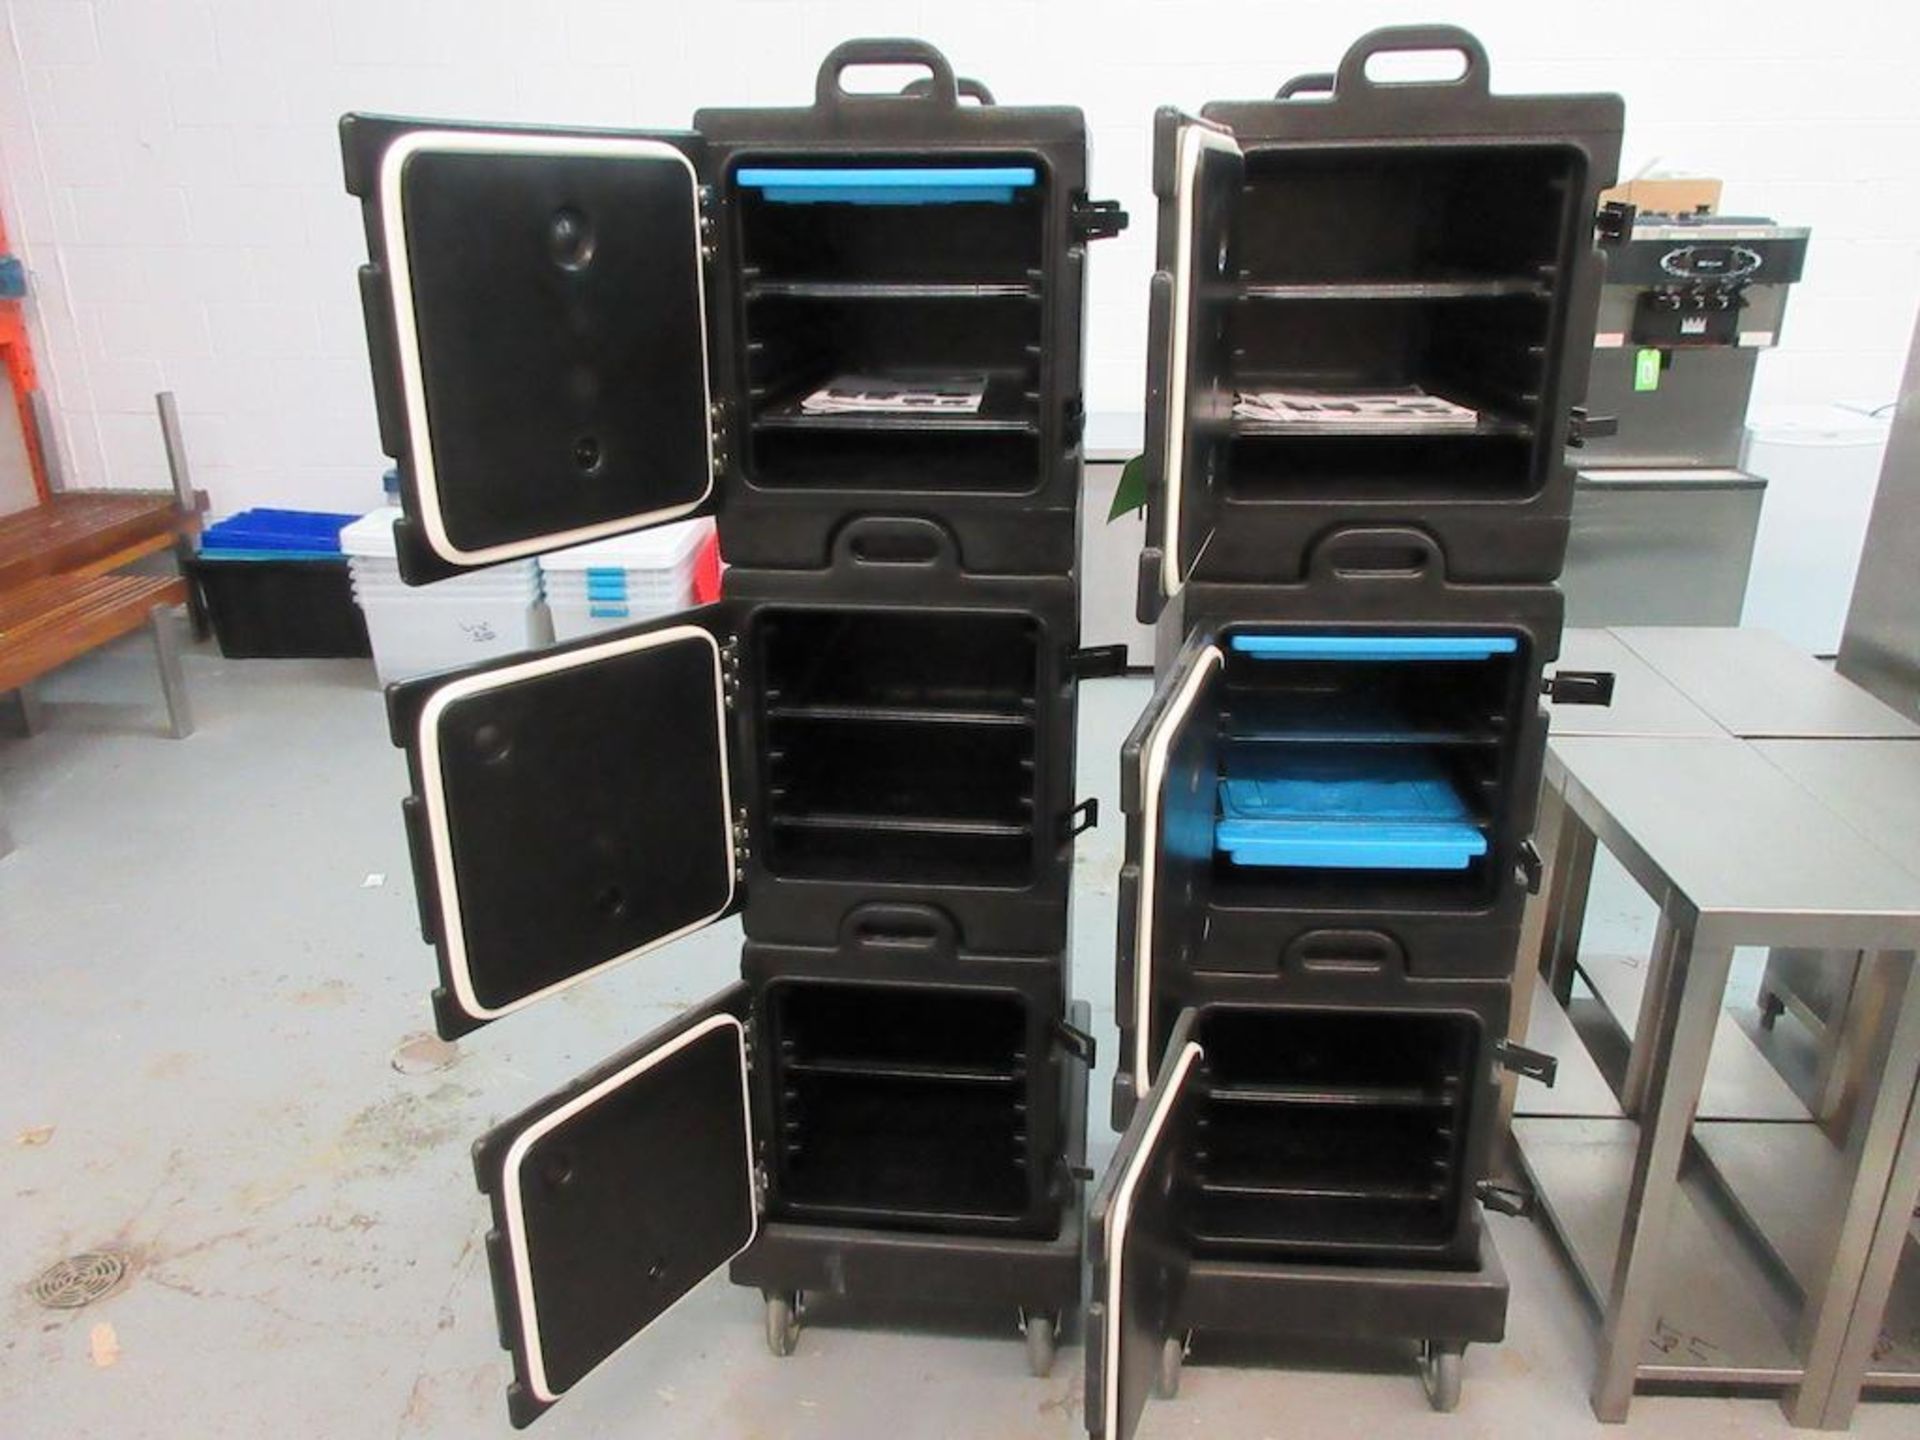 Lot 6 Cambro insulated transporters, 17"w x 24"d x 20"h, adjustable shelves, plus 2 rolling bases - Image 3 of 6